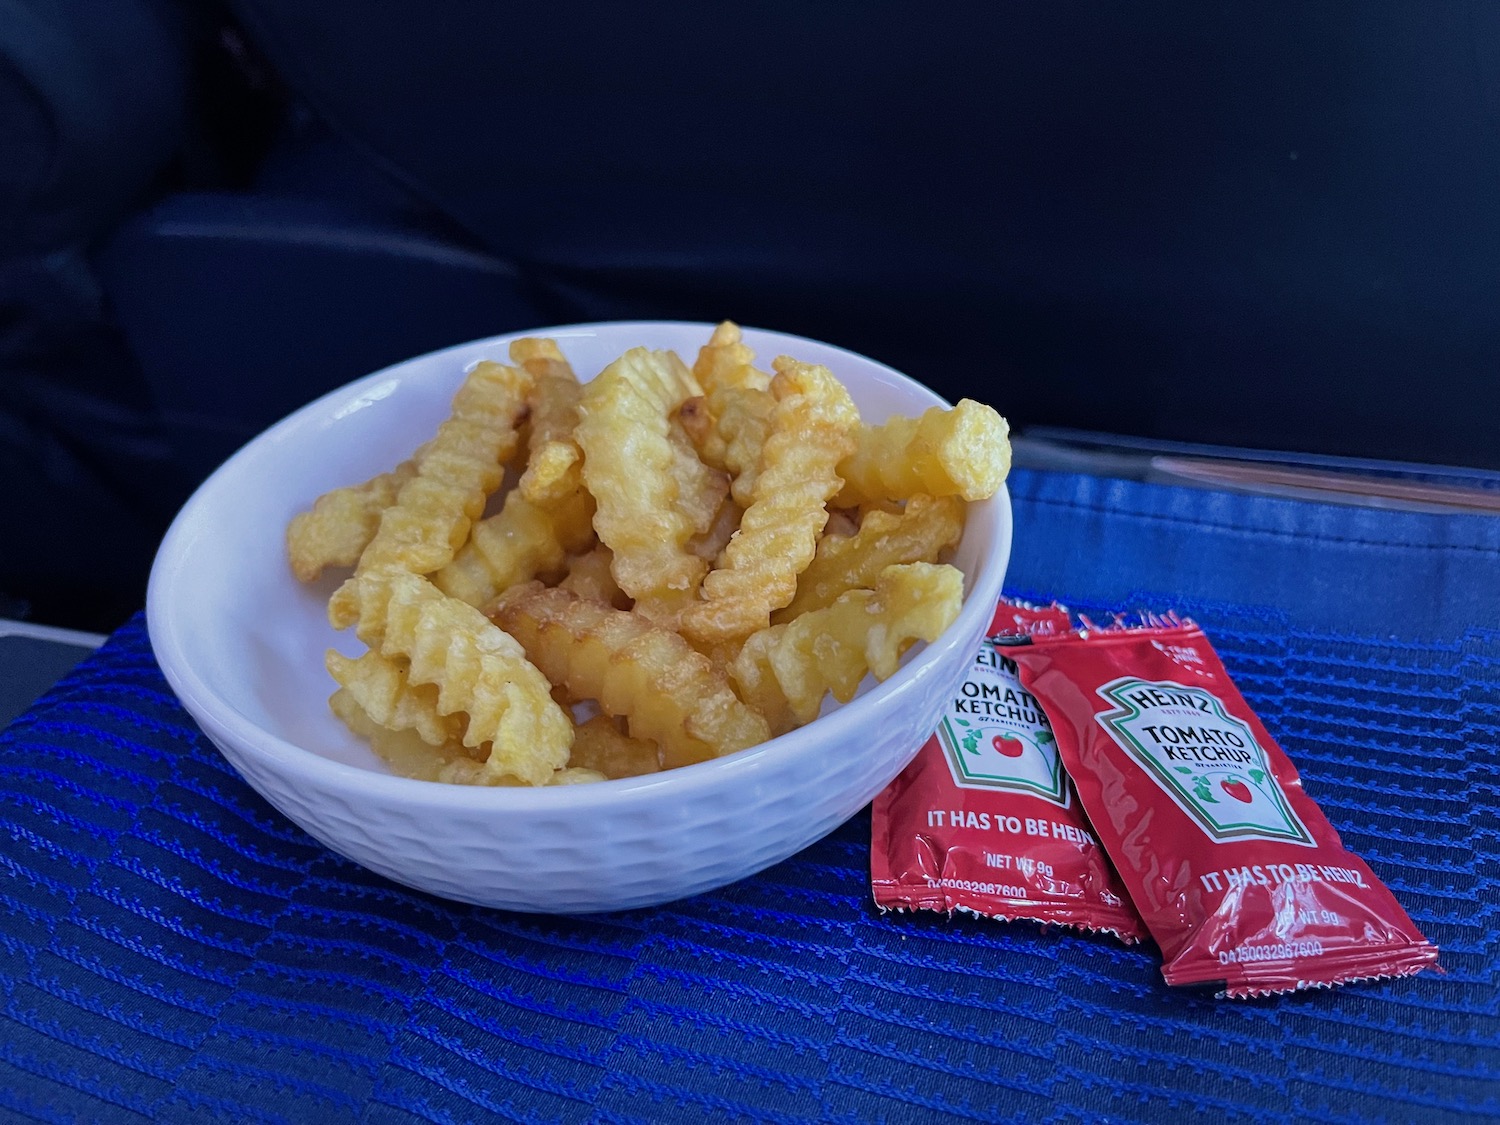 a bowl of french fries and ketchup